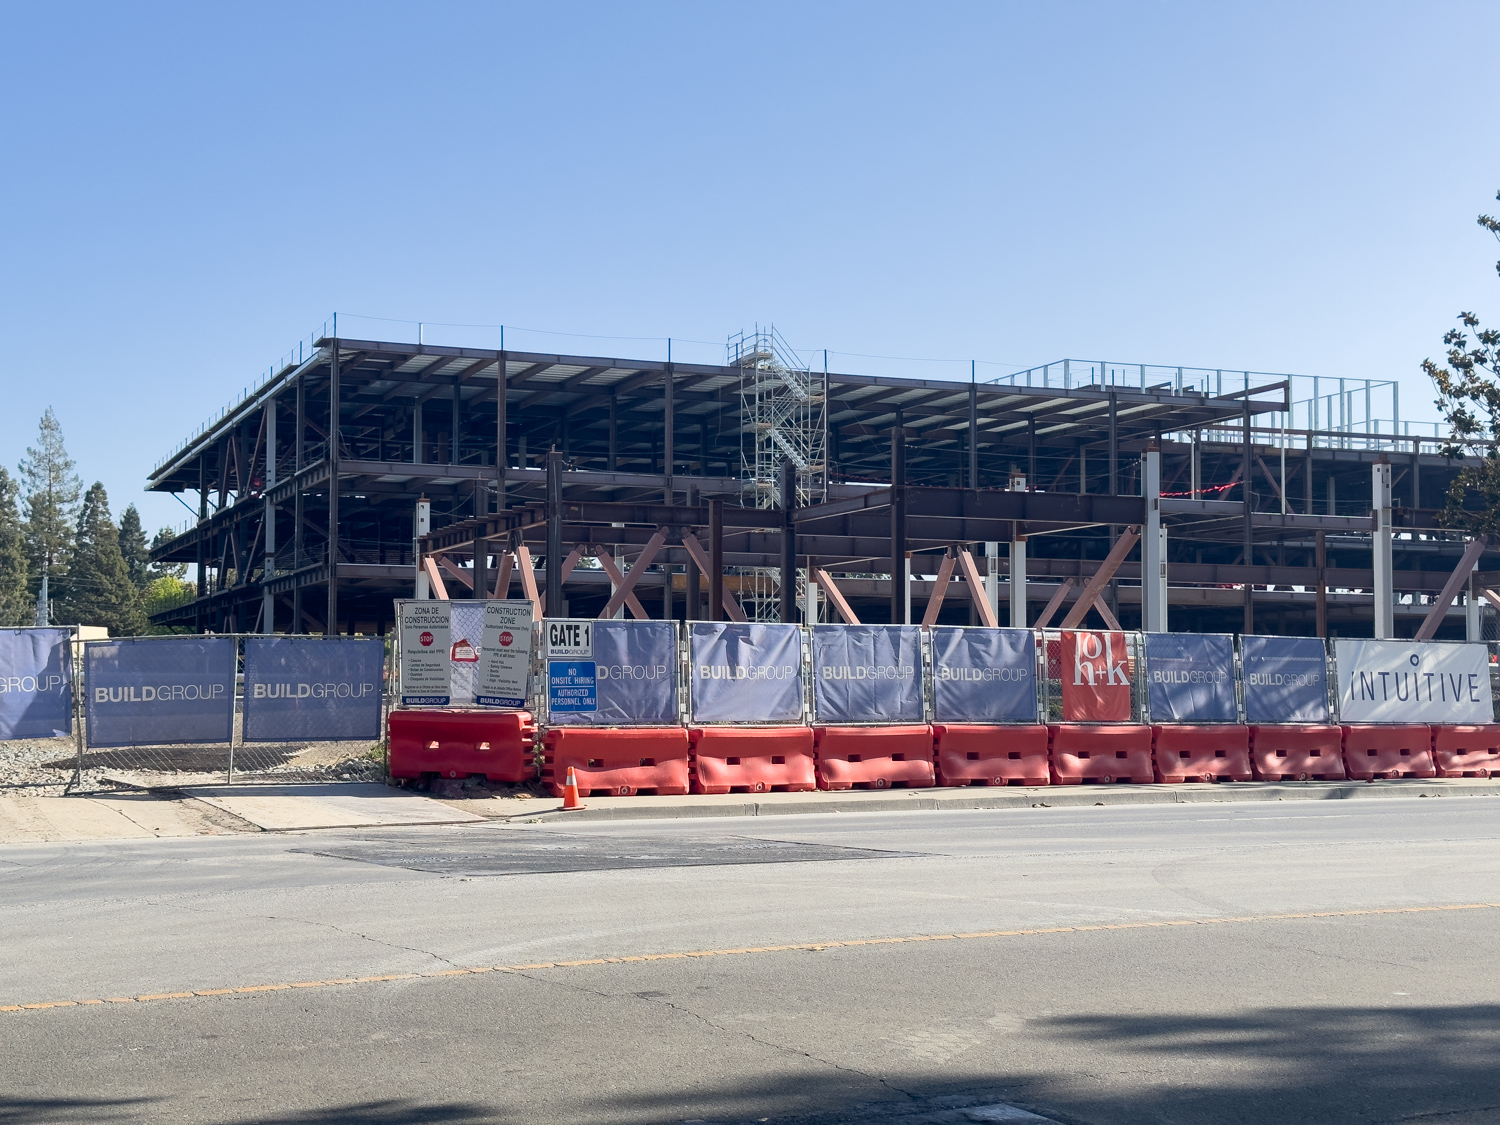 Intuitive Offices at 950 Kifer Road construction update, image by author